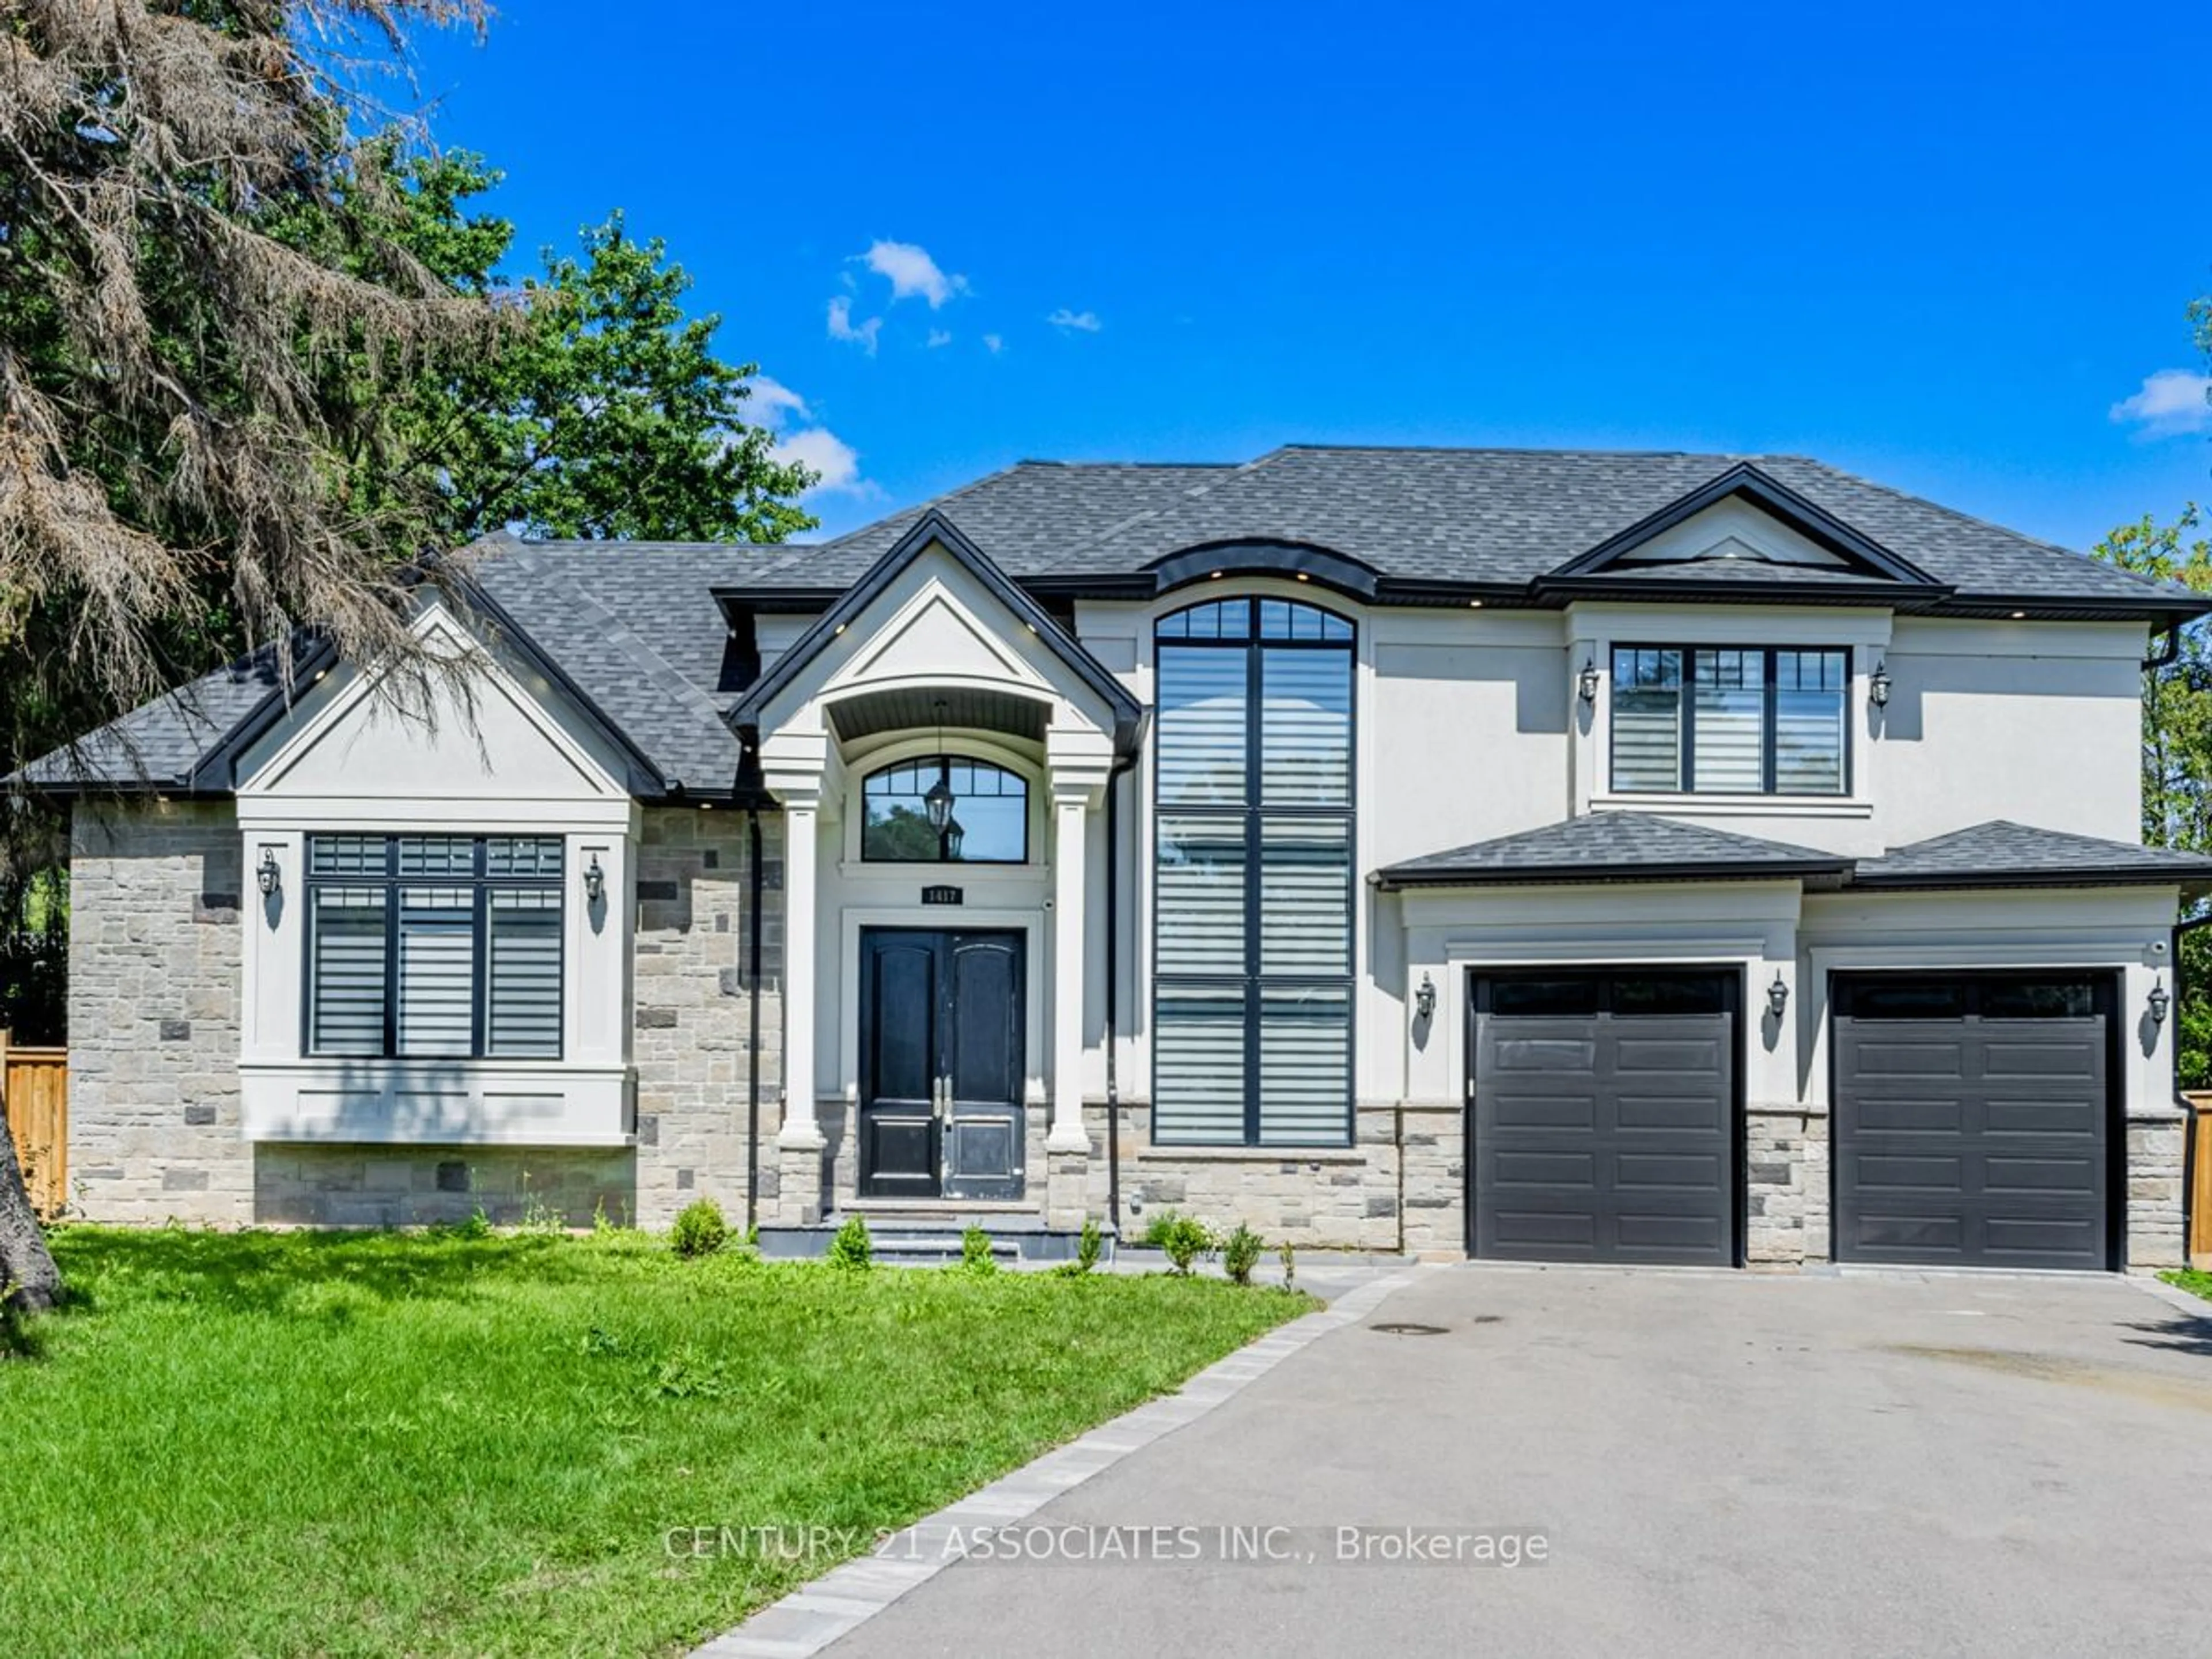 Home with brick exterior material for 1417 Willowdown Rd, Oakville Ontario L6L 1X2